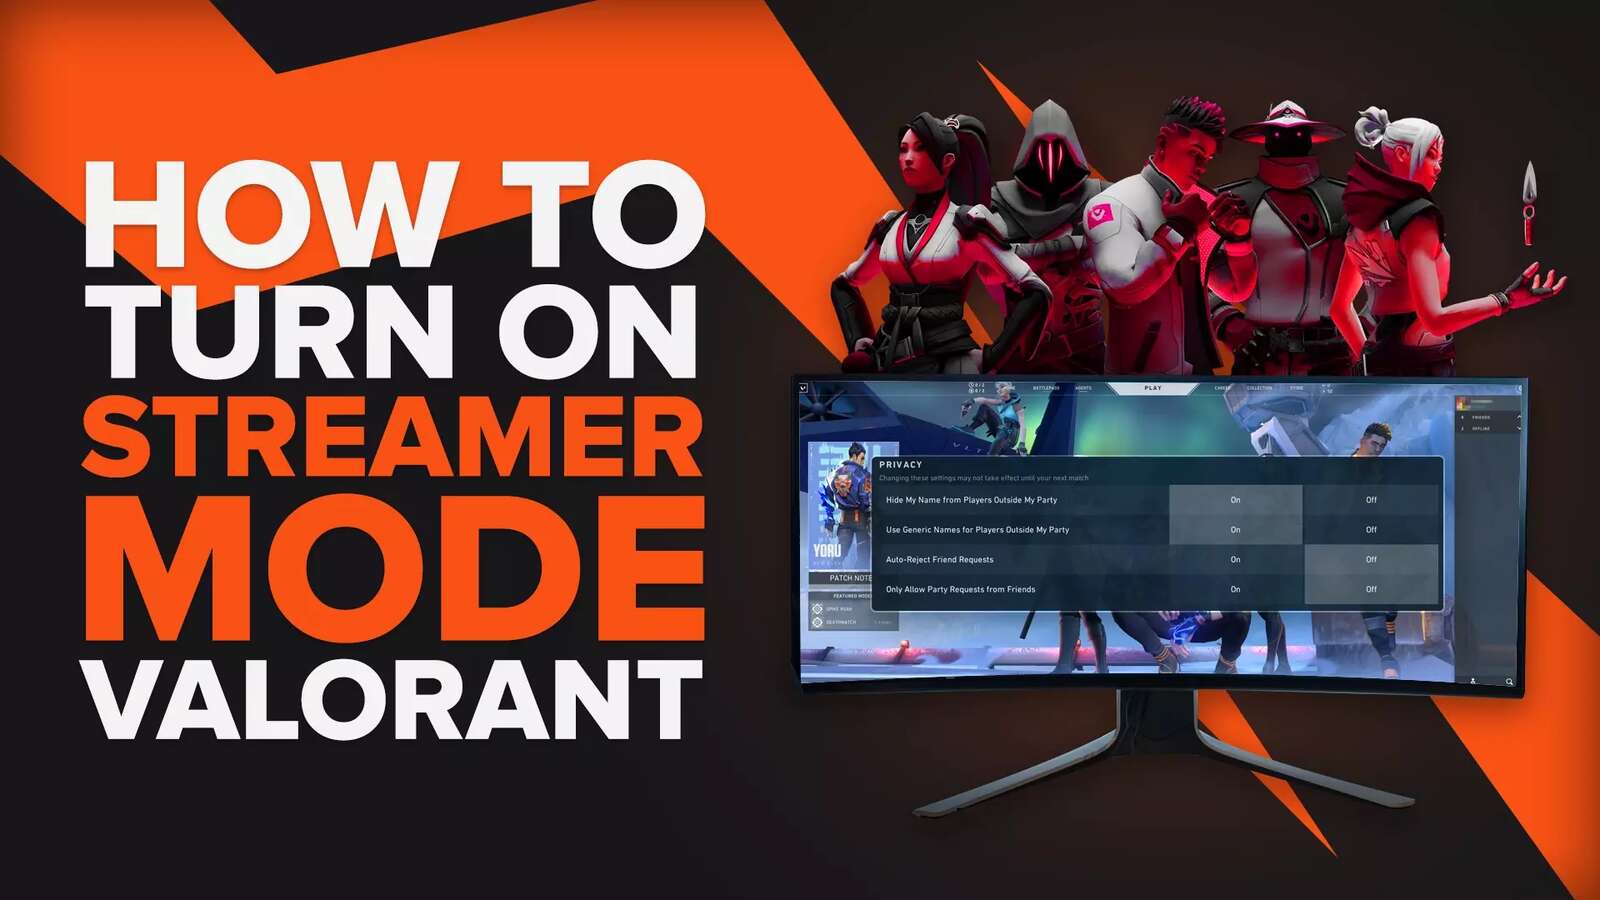 How To Turn On Streamer Mode In Valorant? [Step-By-Step]